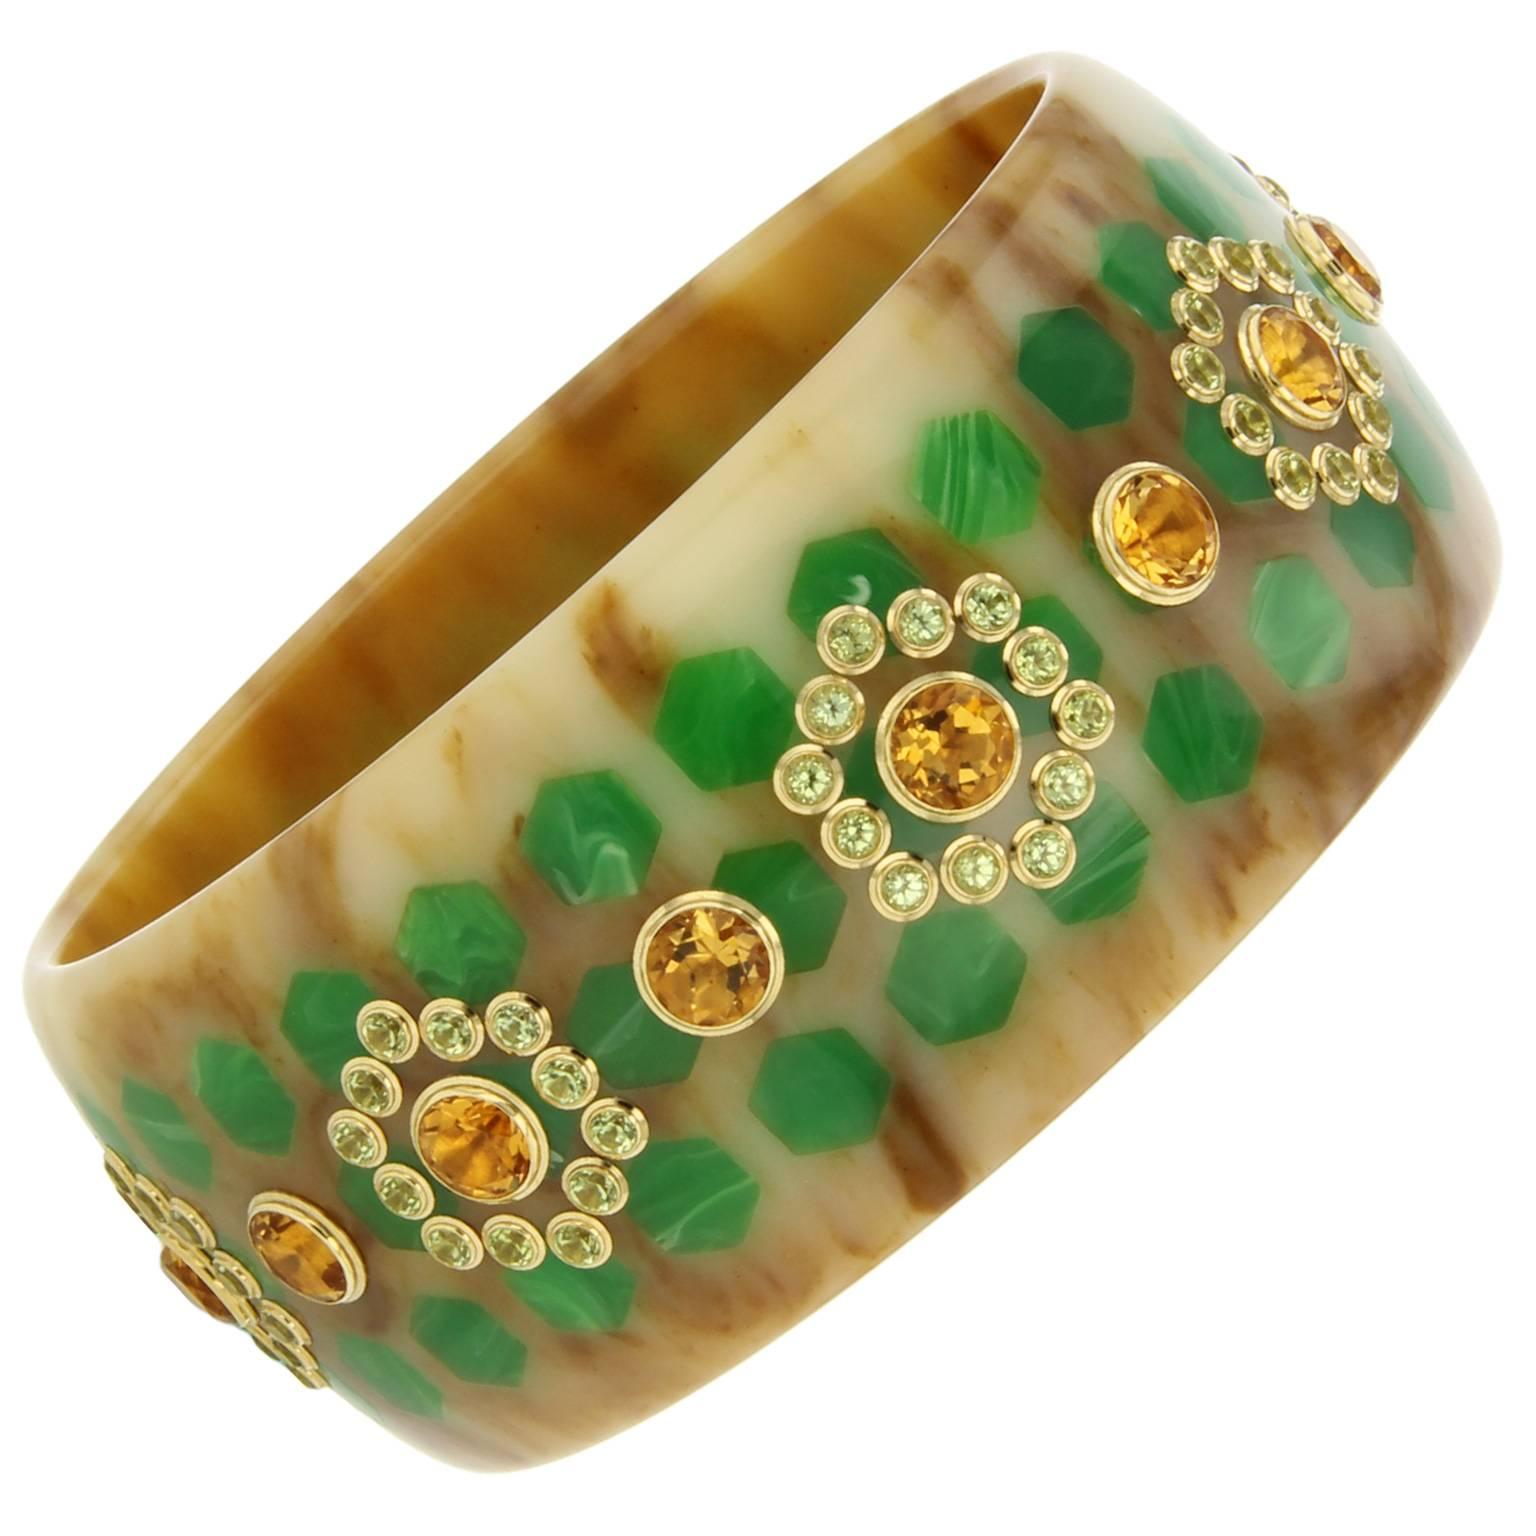 This is an eye-catching, marbled beige and green vintage bakelite bangle.  Masterfully inlaid with hexagonal shapes and studded with peridot and large round citrine set in 18k yellow gold bezels.   

Full details below: 
• From the Mark Davis